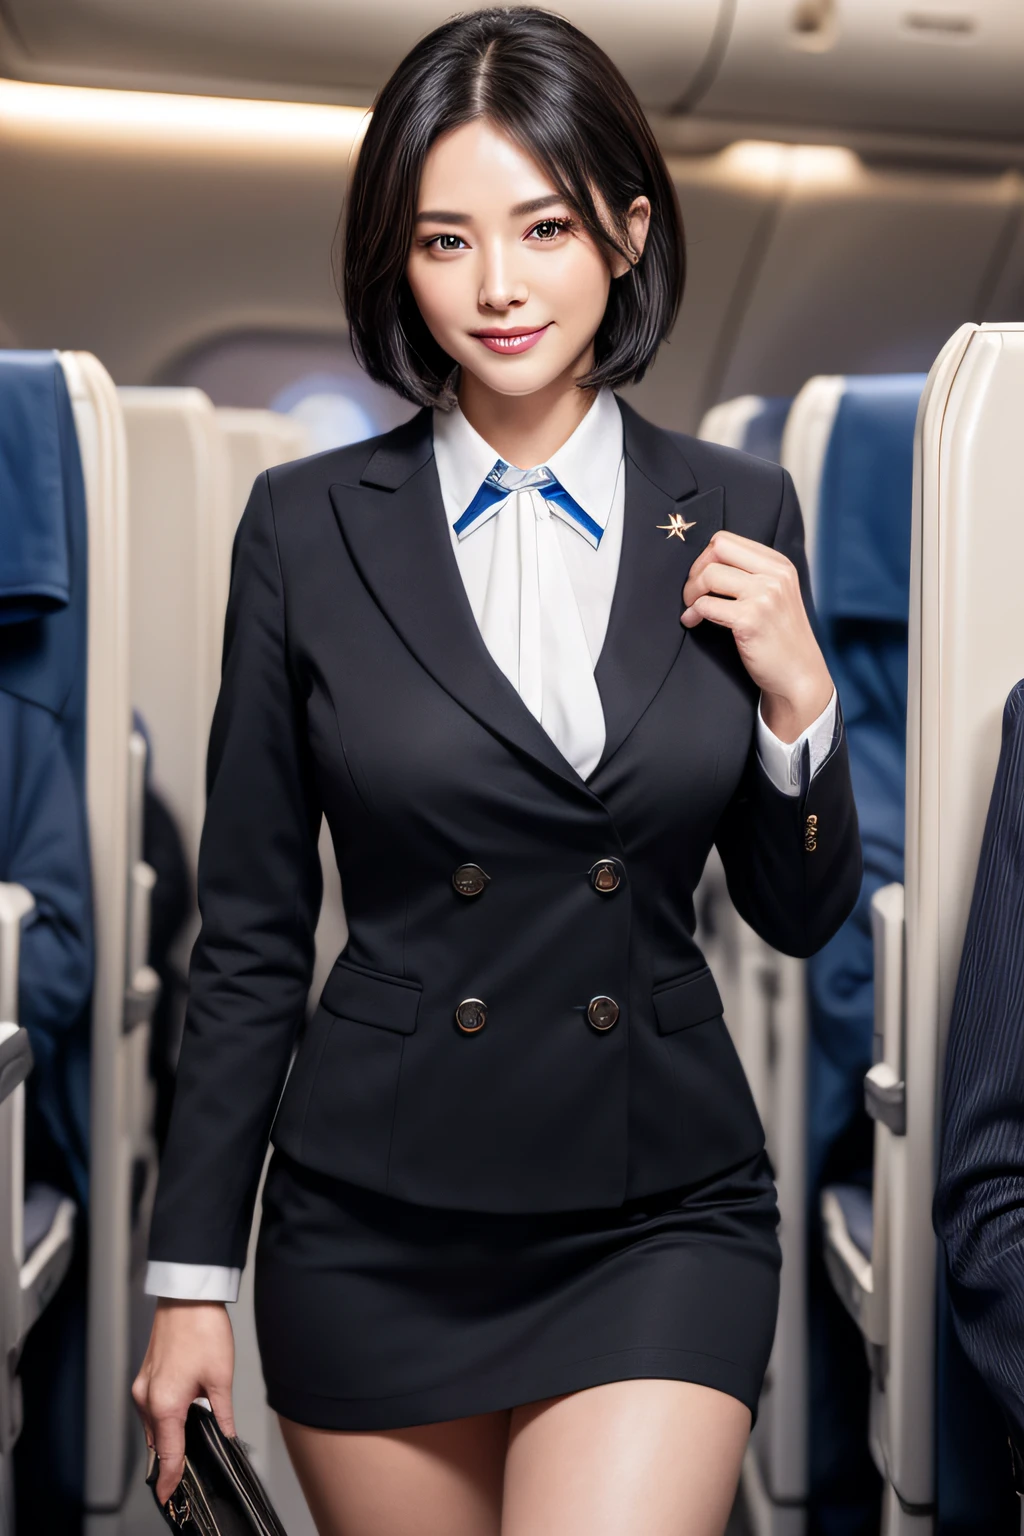 1womanl, 40 years、hyperdetailed face、Detailed lips、A detailed eye、double eyelid、(Black bob hair、Smiling as you walk slowly down the aisle)、(Stewardess uniform:1.2)、(Glamorous body)、(Colossal tits)、thighs thighs thighs thighs, Perfect fit, Perfect image realism, Background with: (Business Class aisle on airplanes:1.2), Cowboy Shot, Meticulous background with, detailed costume, Perfect litthing、Hyper-Realism、(Photorealsitic:1.4)、8K maximum resolution, (​masterpiece), ighly detailed, Professional